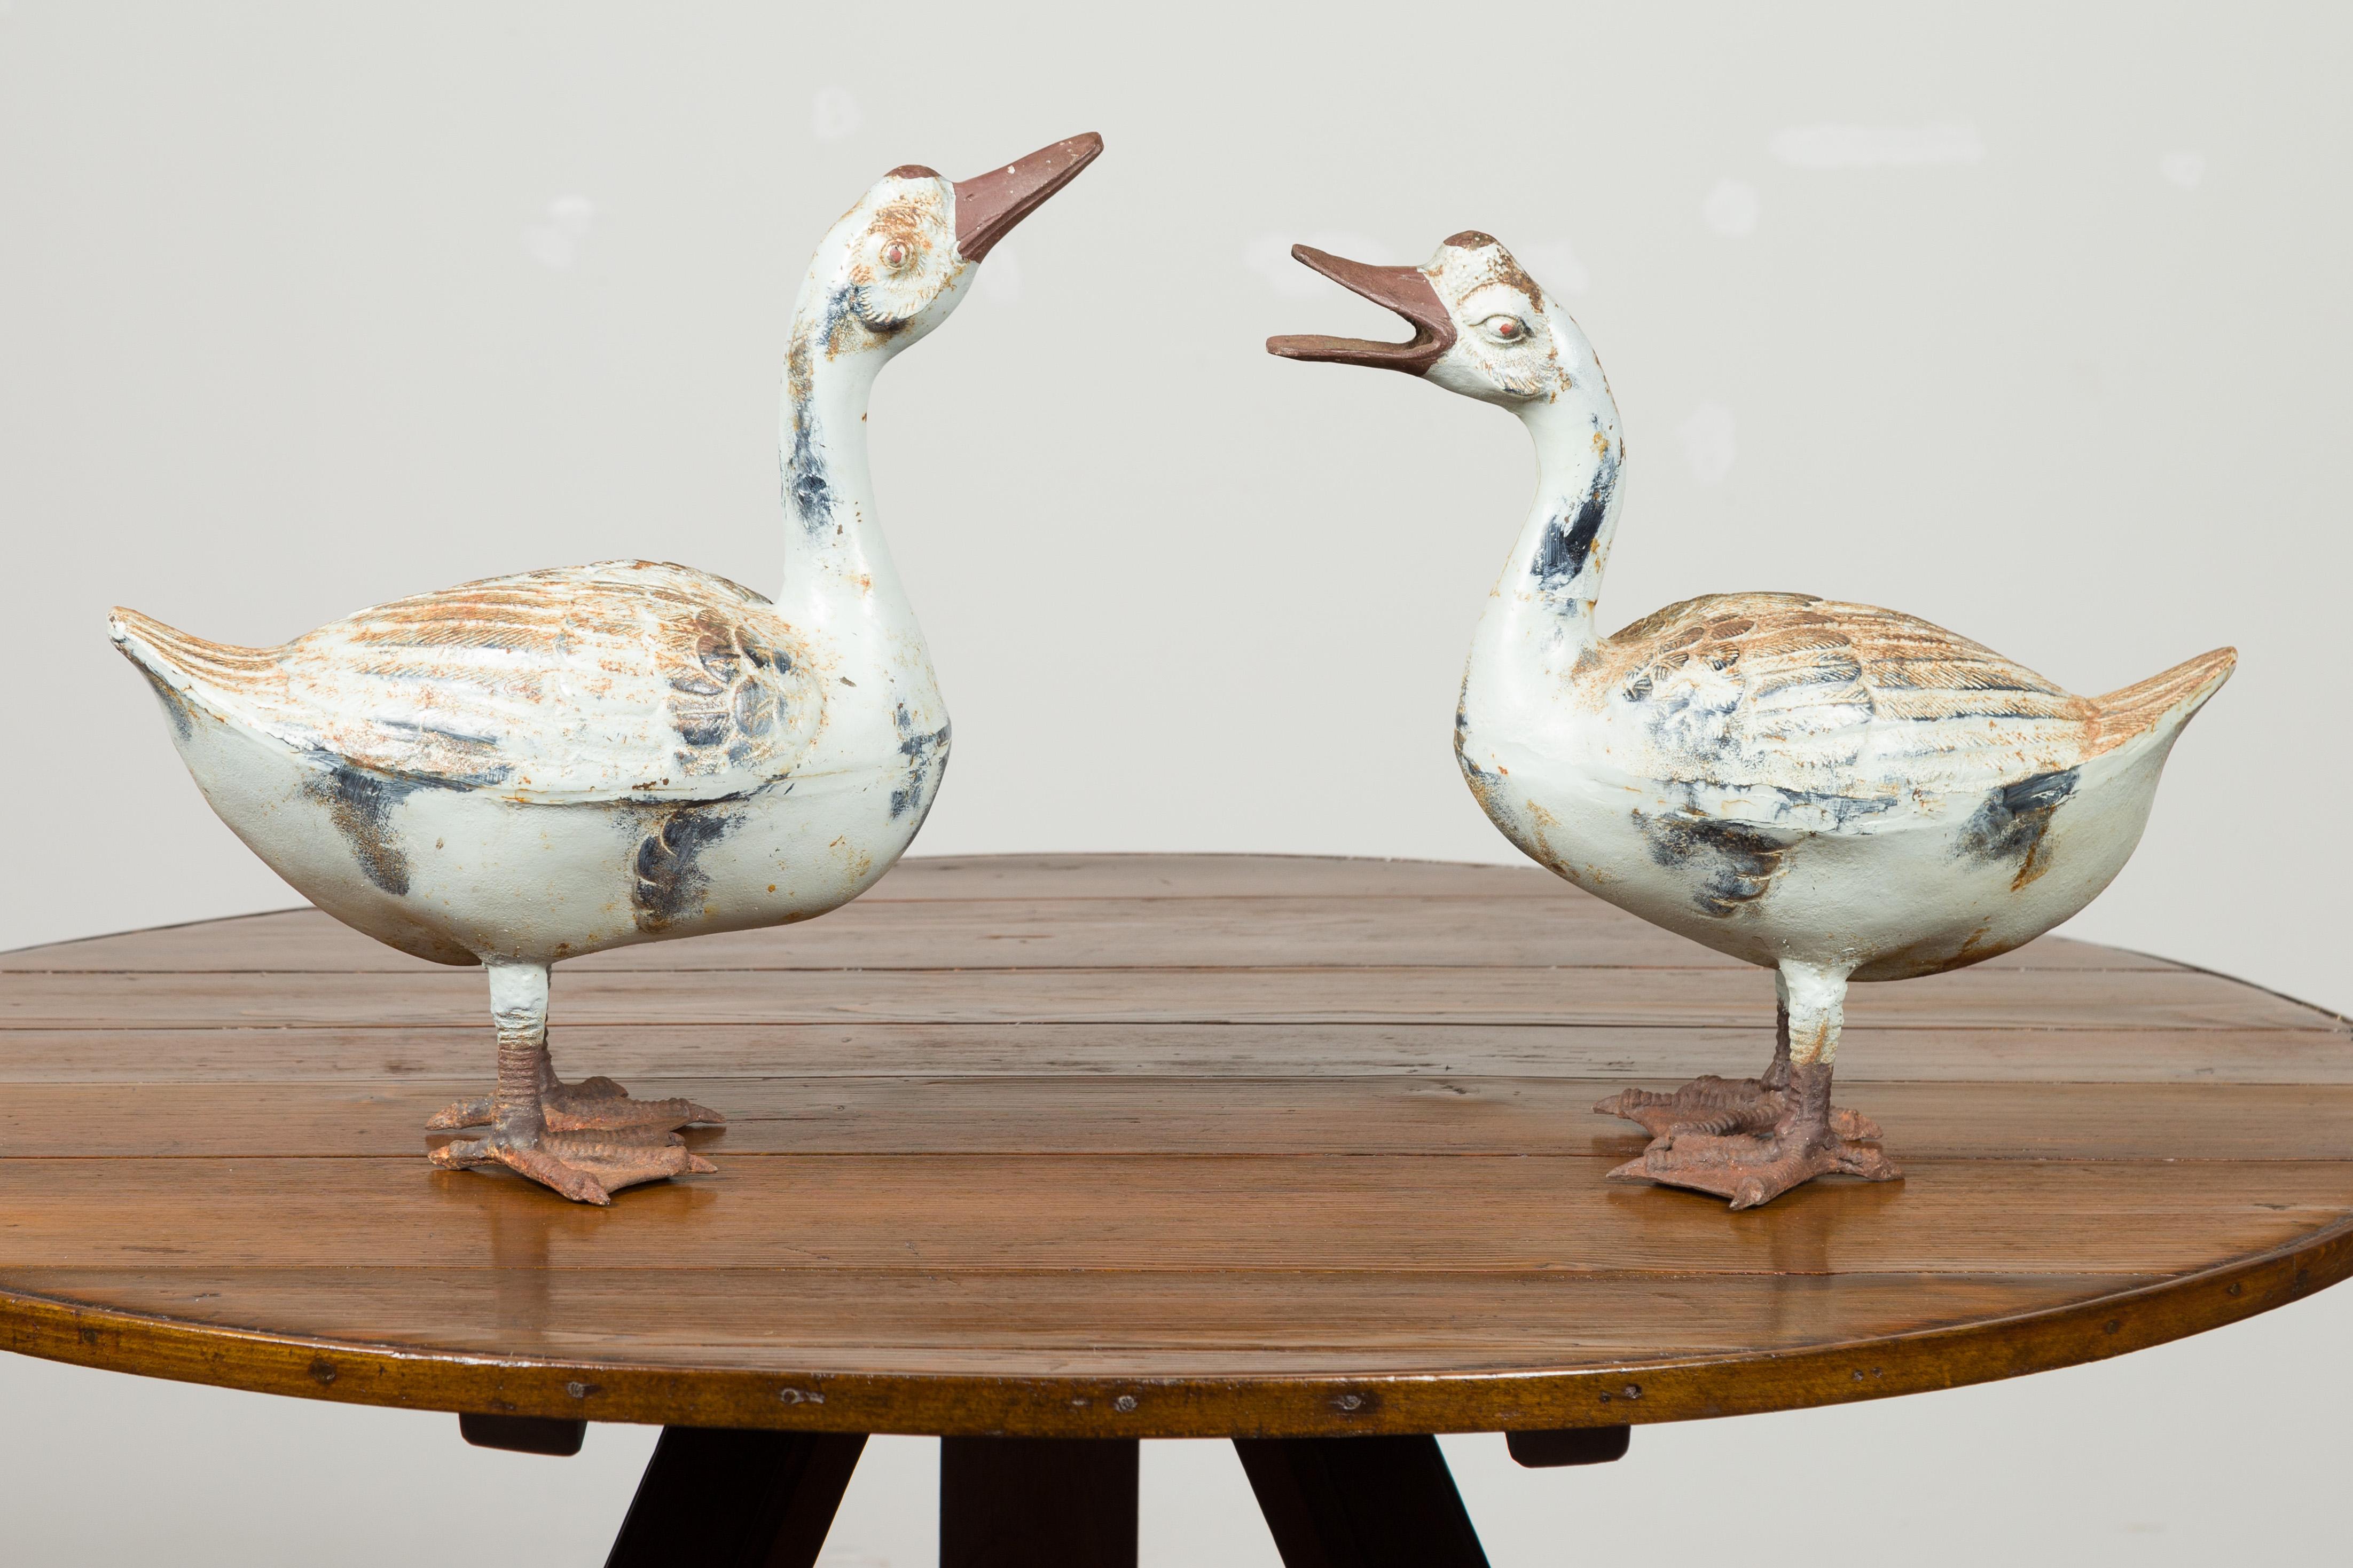 A pair of vintage American iron quacking ducks from the mid 20th century, with distressed patina. Made in the USA during the midcentury period, each of this pair or iron sculptures depicts a duck firmly planted on its palmate. A great sense of life